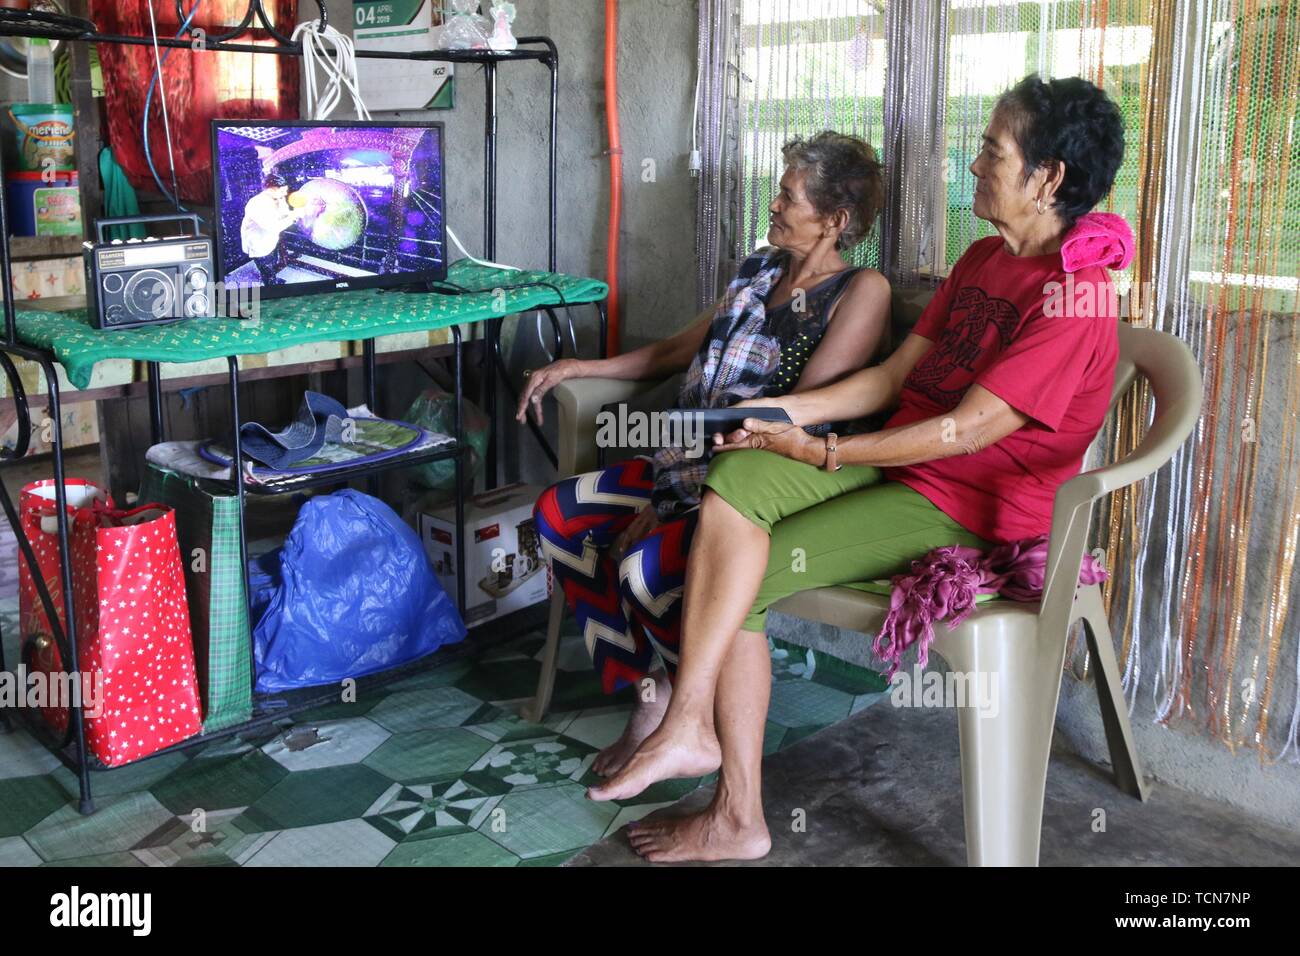 San Marcelino, Philippines. 6th June, 2019. Villagers watch television shows in Baliwet of San Marcelino, the Philippines, June 6, 2019. On June 7, a Chinese-funded solar project lit up Baliwet, a mountain village about 190 km northwest of Manila. TO GO WITH Feature: Chinese-funded solar project lights up remote Philippine village Credit: Zheng Xin/Xinhua/Alamy Live News Stock Photo